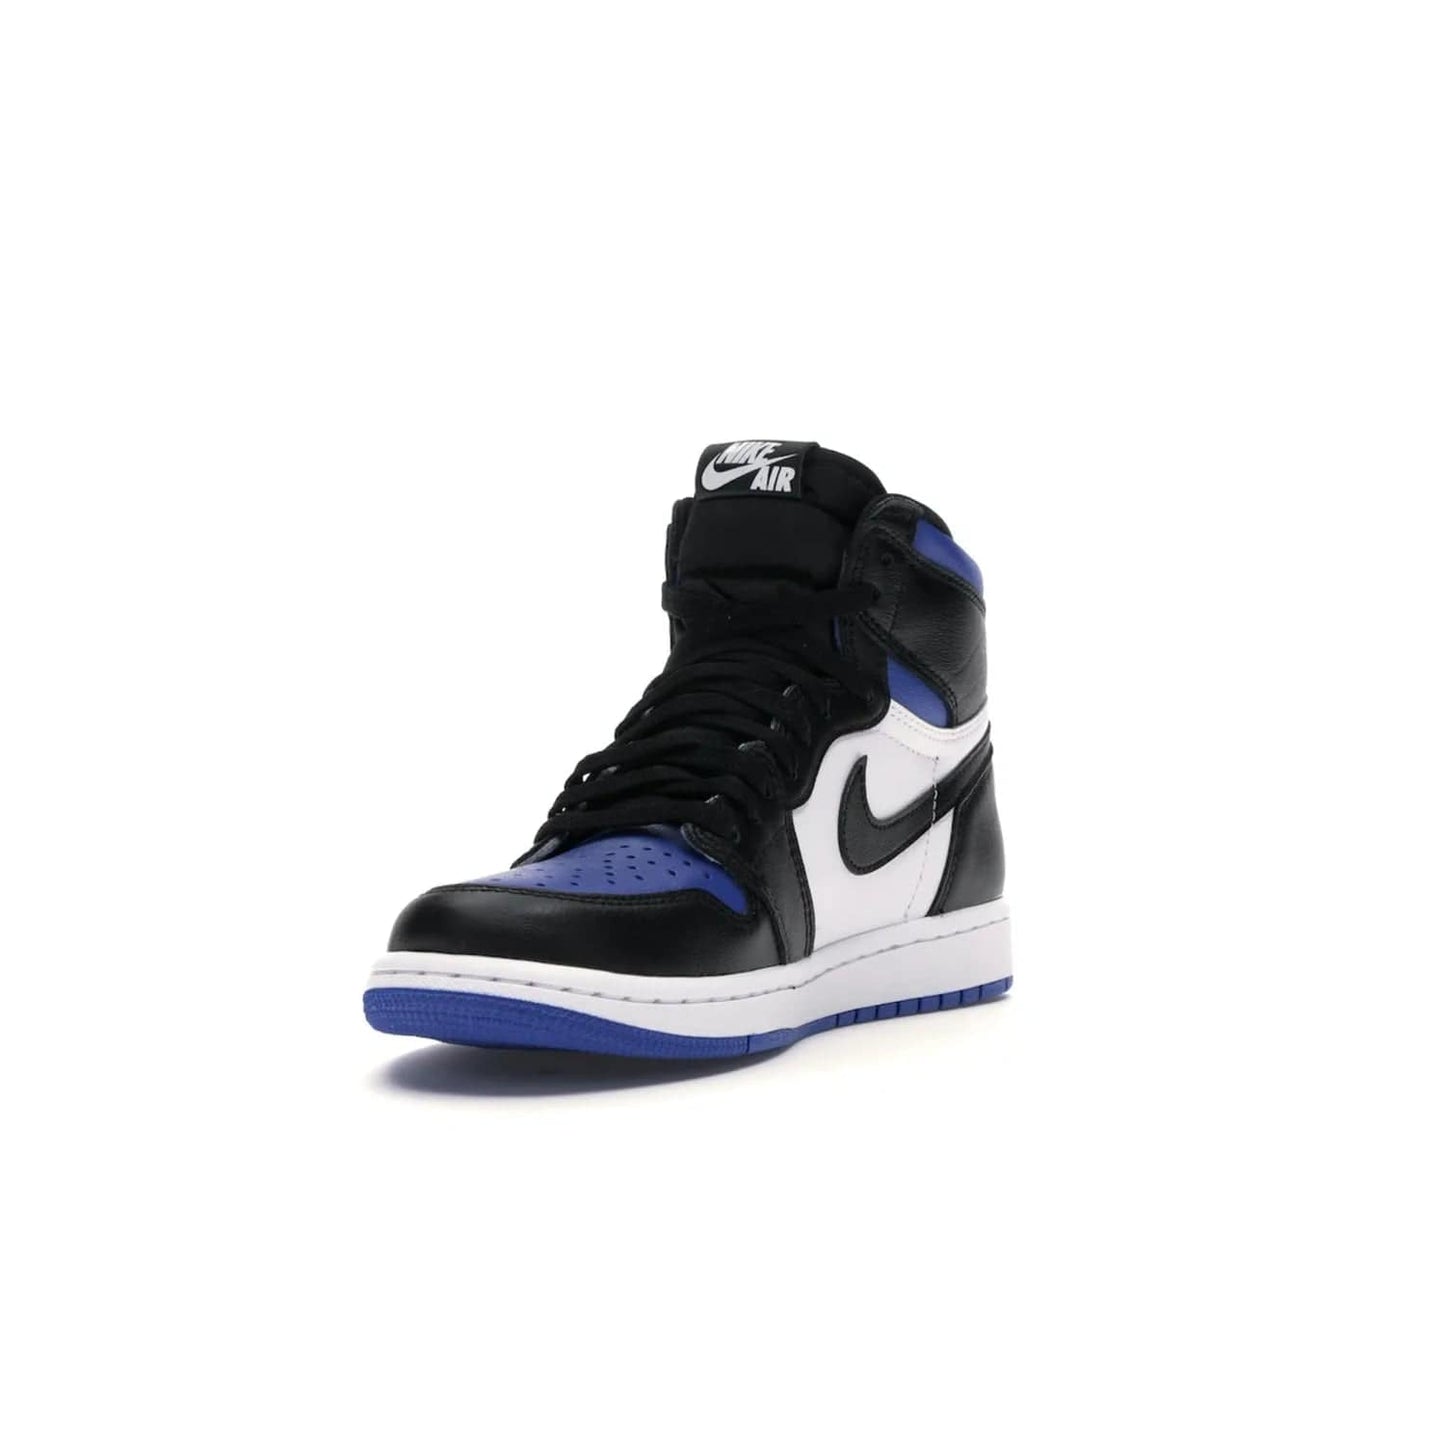 Jordan 1 Retro High Royal Toe - Image 13 - Only at www.BallersClubKickz.com - Refresh your look with the Jordan 1 Retro High Royal Toe. This classic AJ 1 sports a white and royal leather upper, black leather overlays, and branded leather tongue tag. Pick up today and set the streets ablaze.